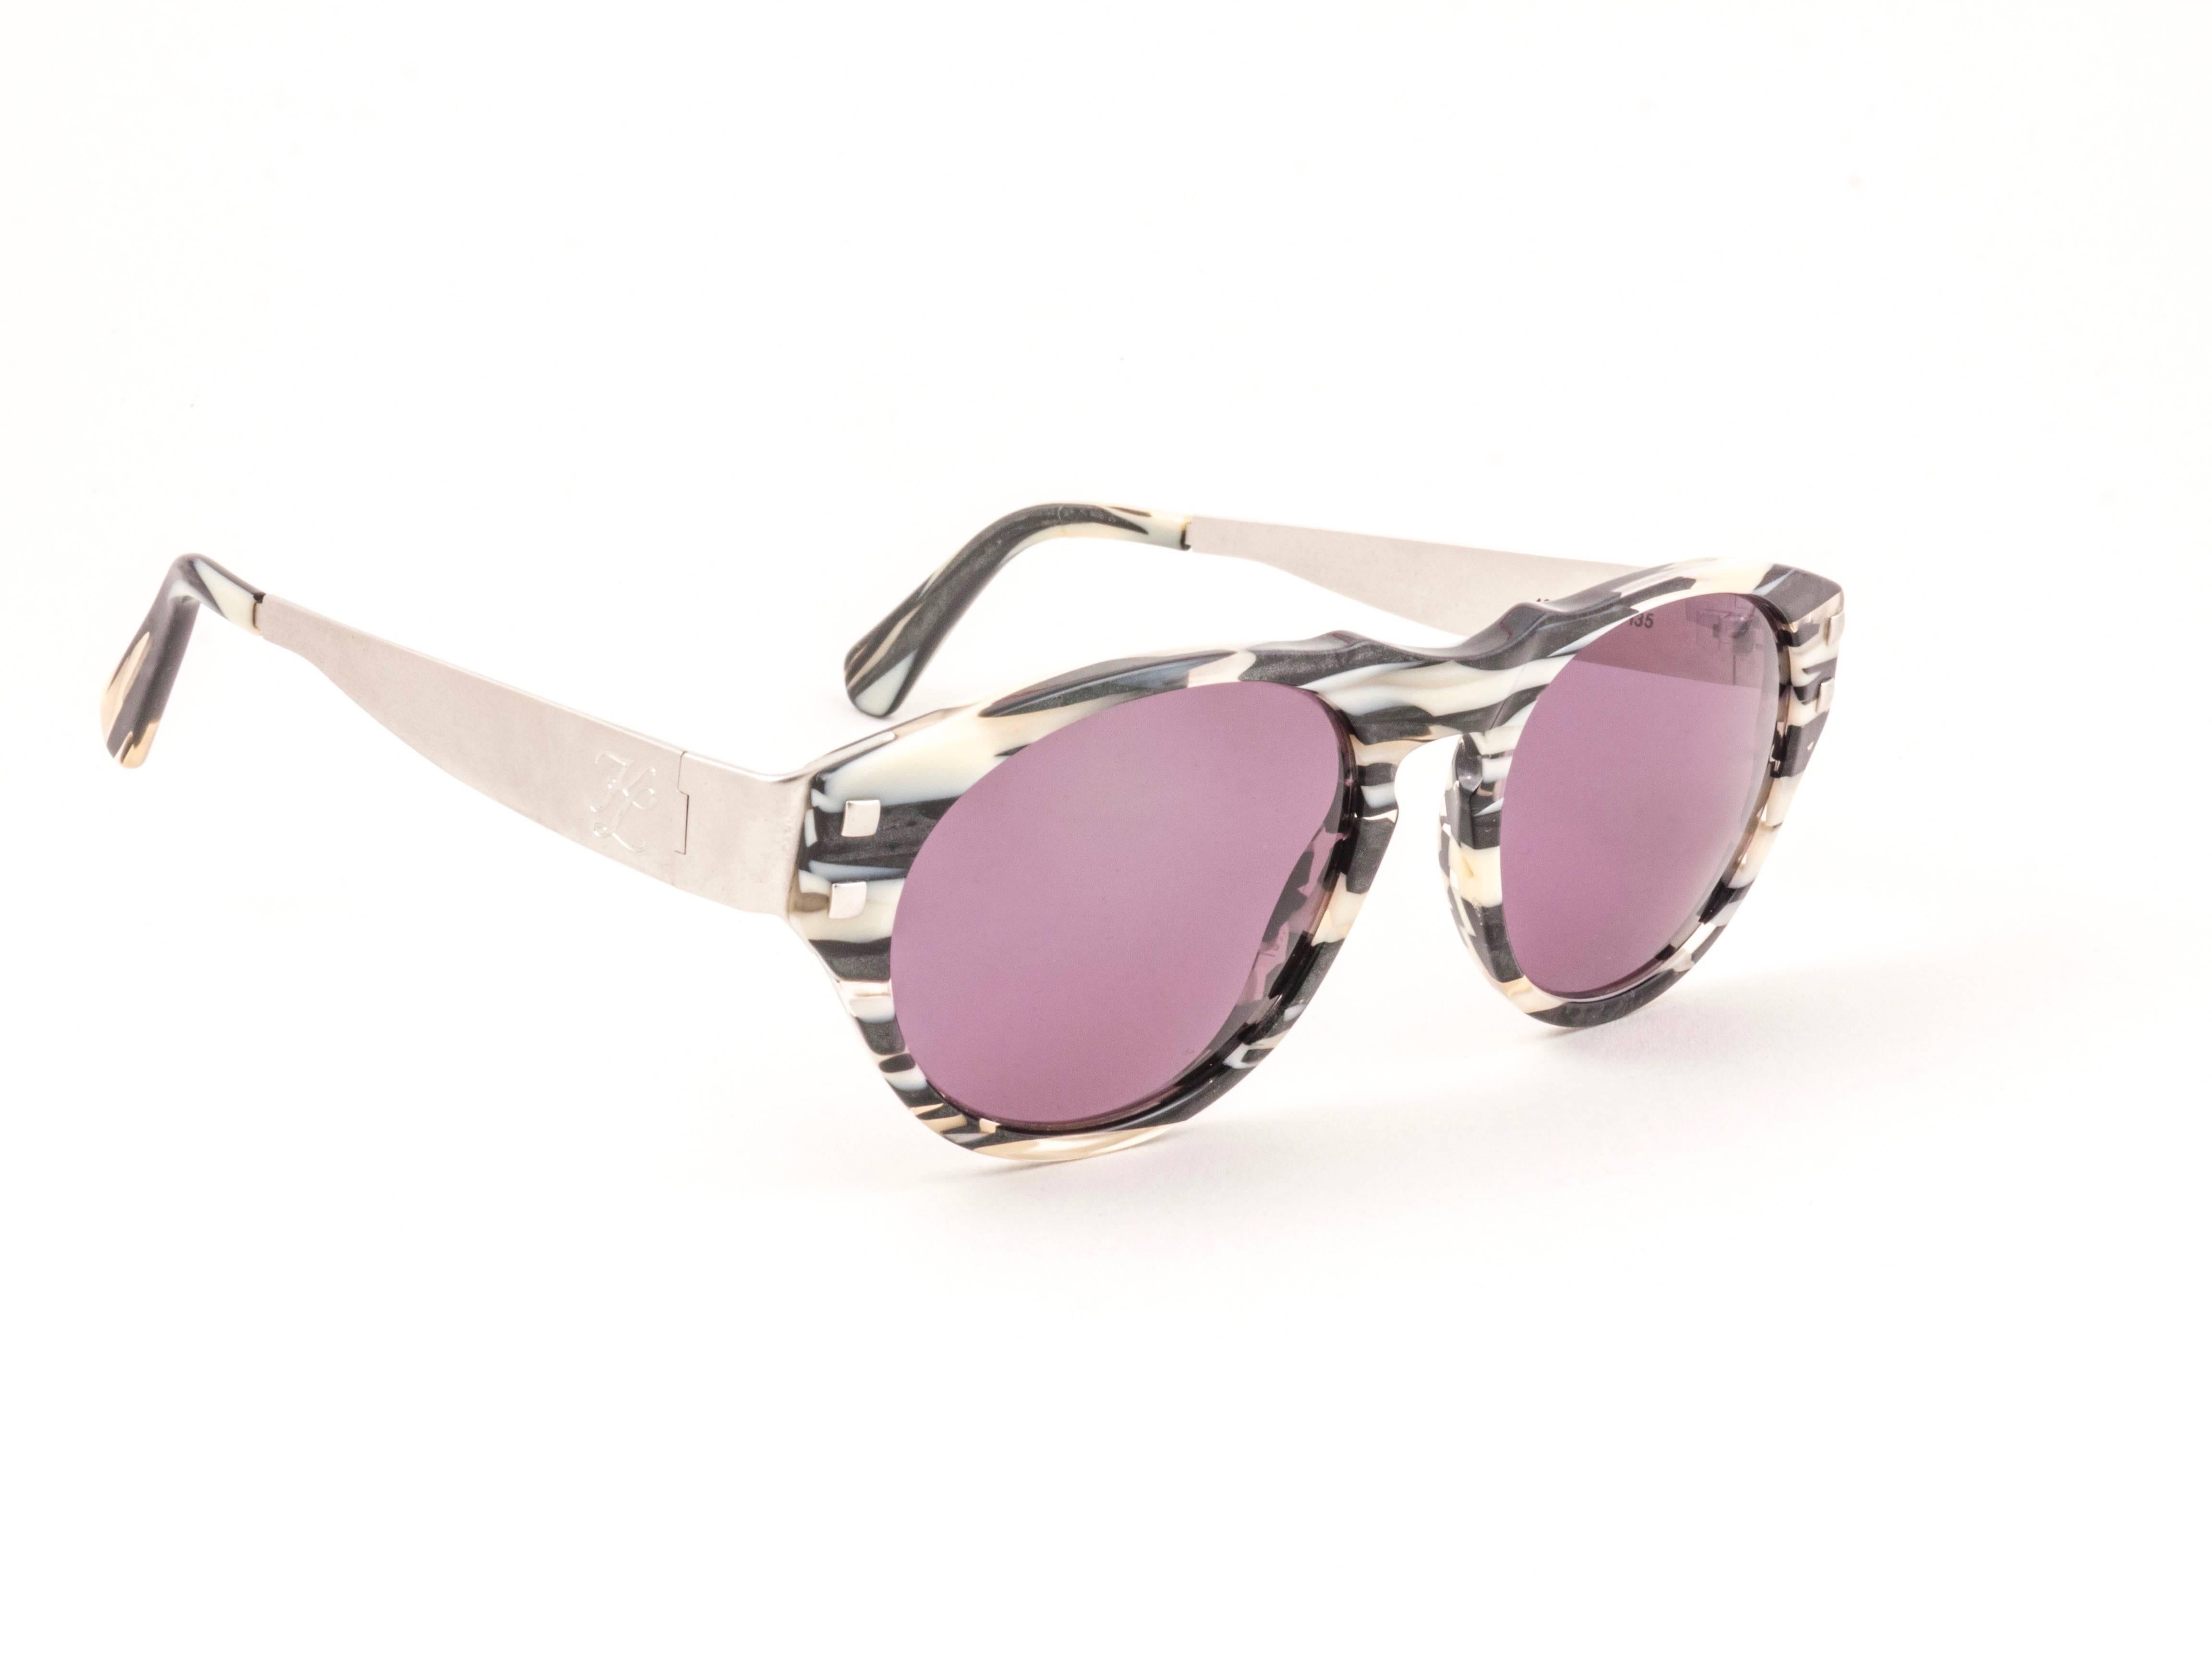 Amazing pair of New vintage 1980's 4602 b 135 Karl Lagerfeld black & white black mosaic sunglasses framing a pair of rose magenta lenses.
 
 New, never worn or displayed. A true fashion statement .